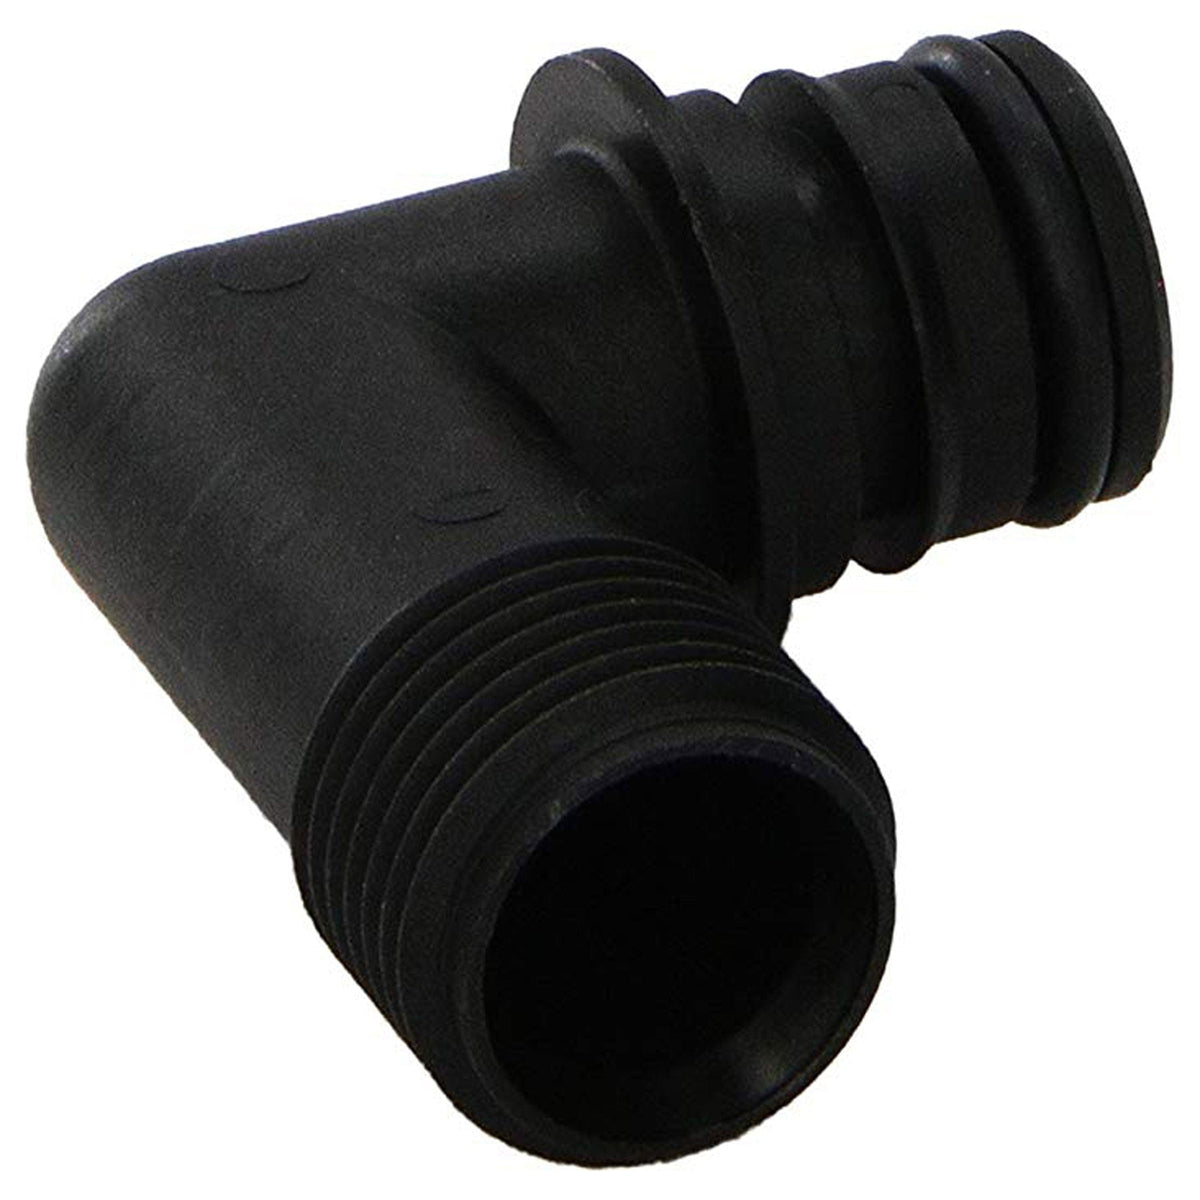 Flojet Qualifies for Free Shipping Flojet Pump Fitting Quad Port x 1/2"-14 Male Adapter Straight #20381000